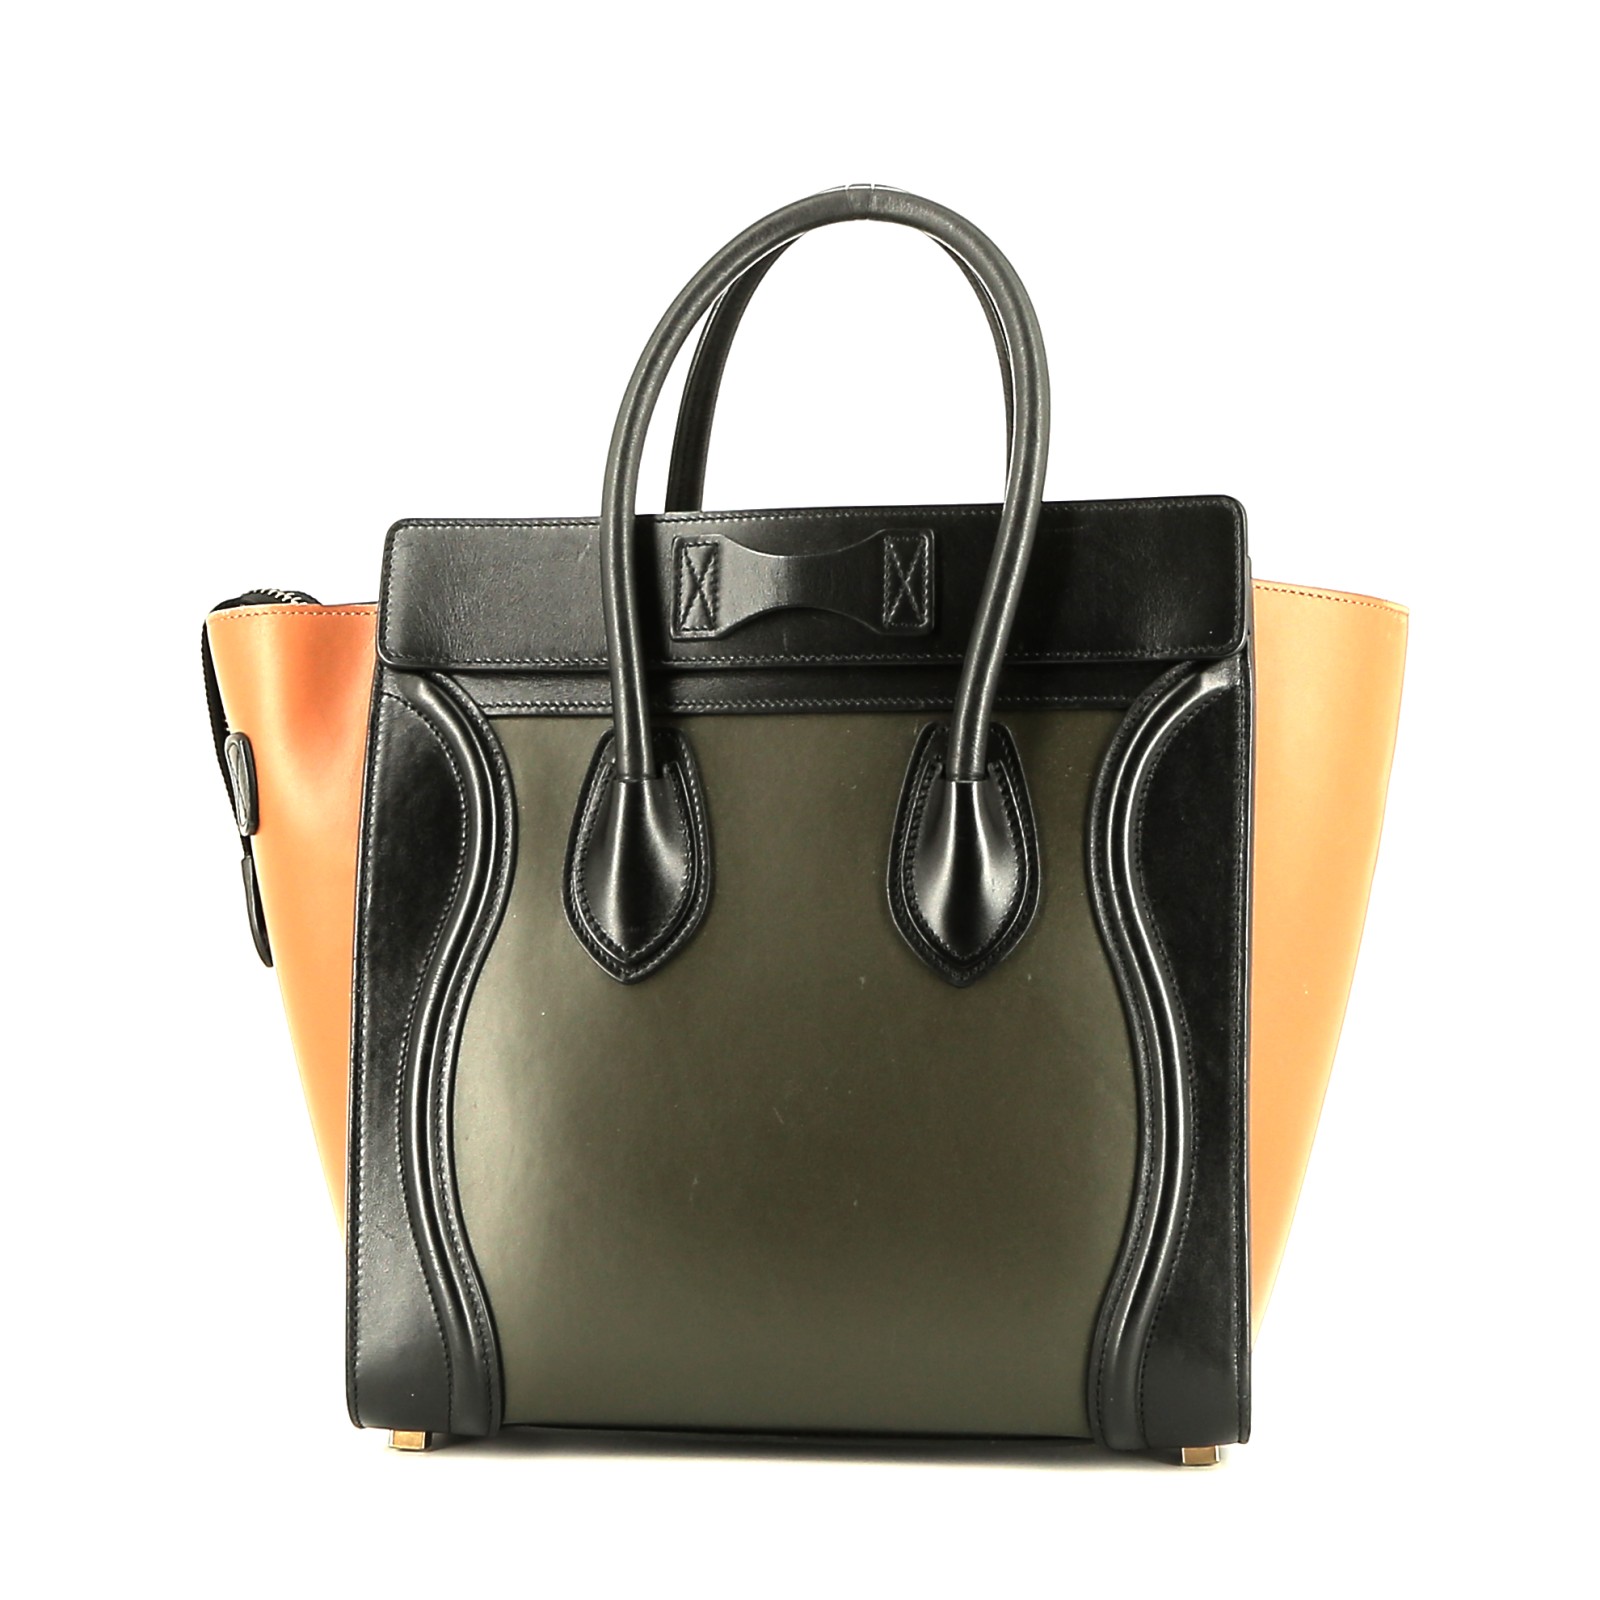 Luggage Handbag In Black, Brown And Green Leather